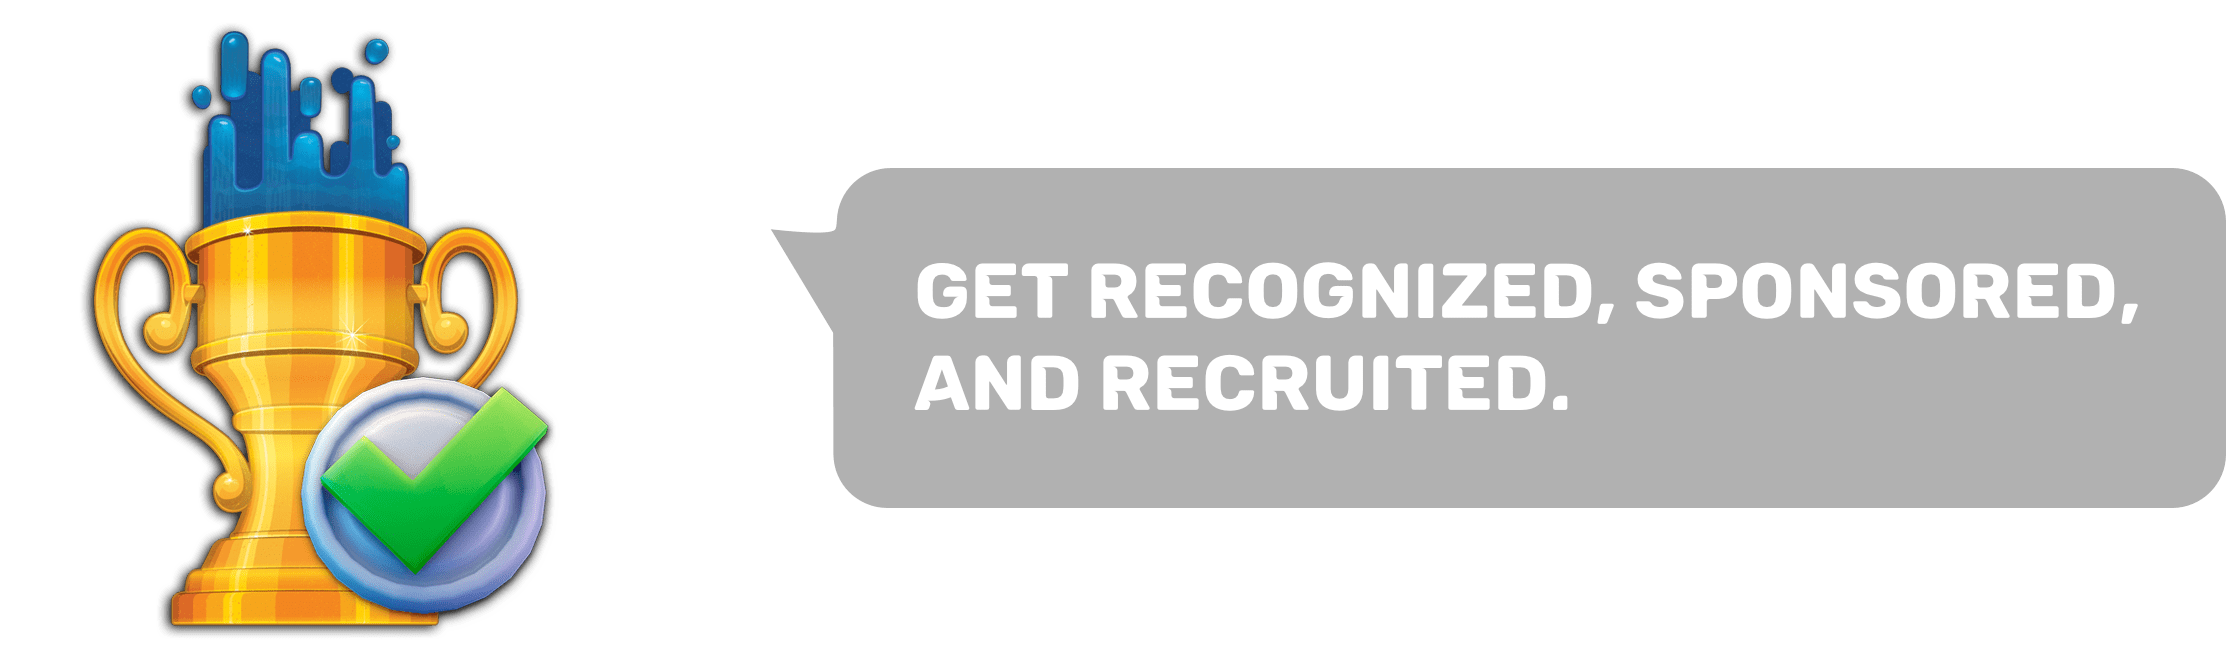 Get Recognized, sponsered, and recruited on Gizer